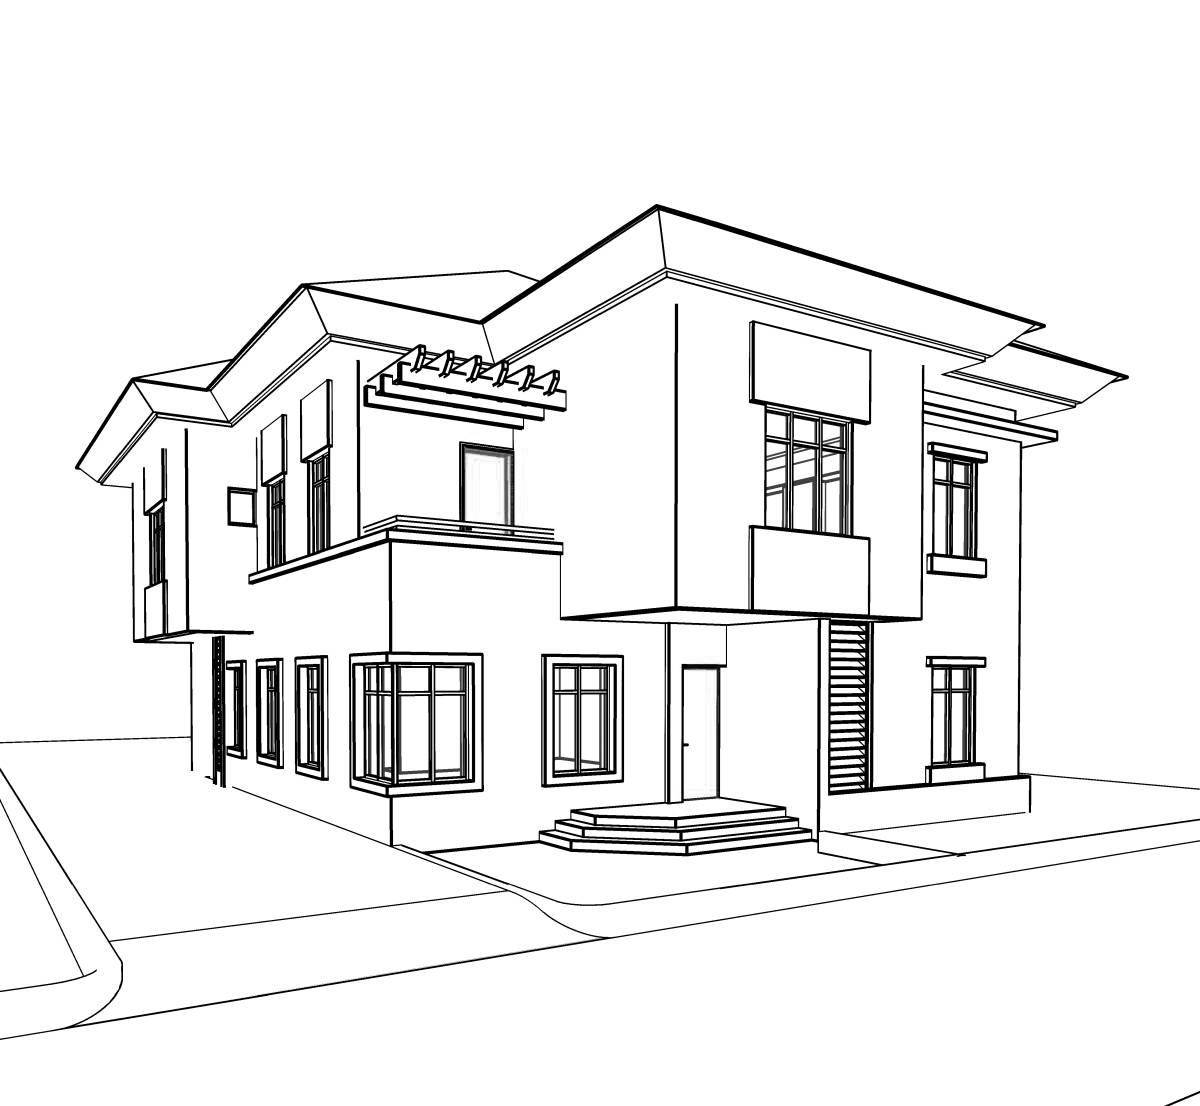 Colouring colorful 2-storey house